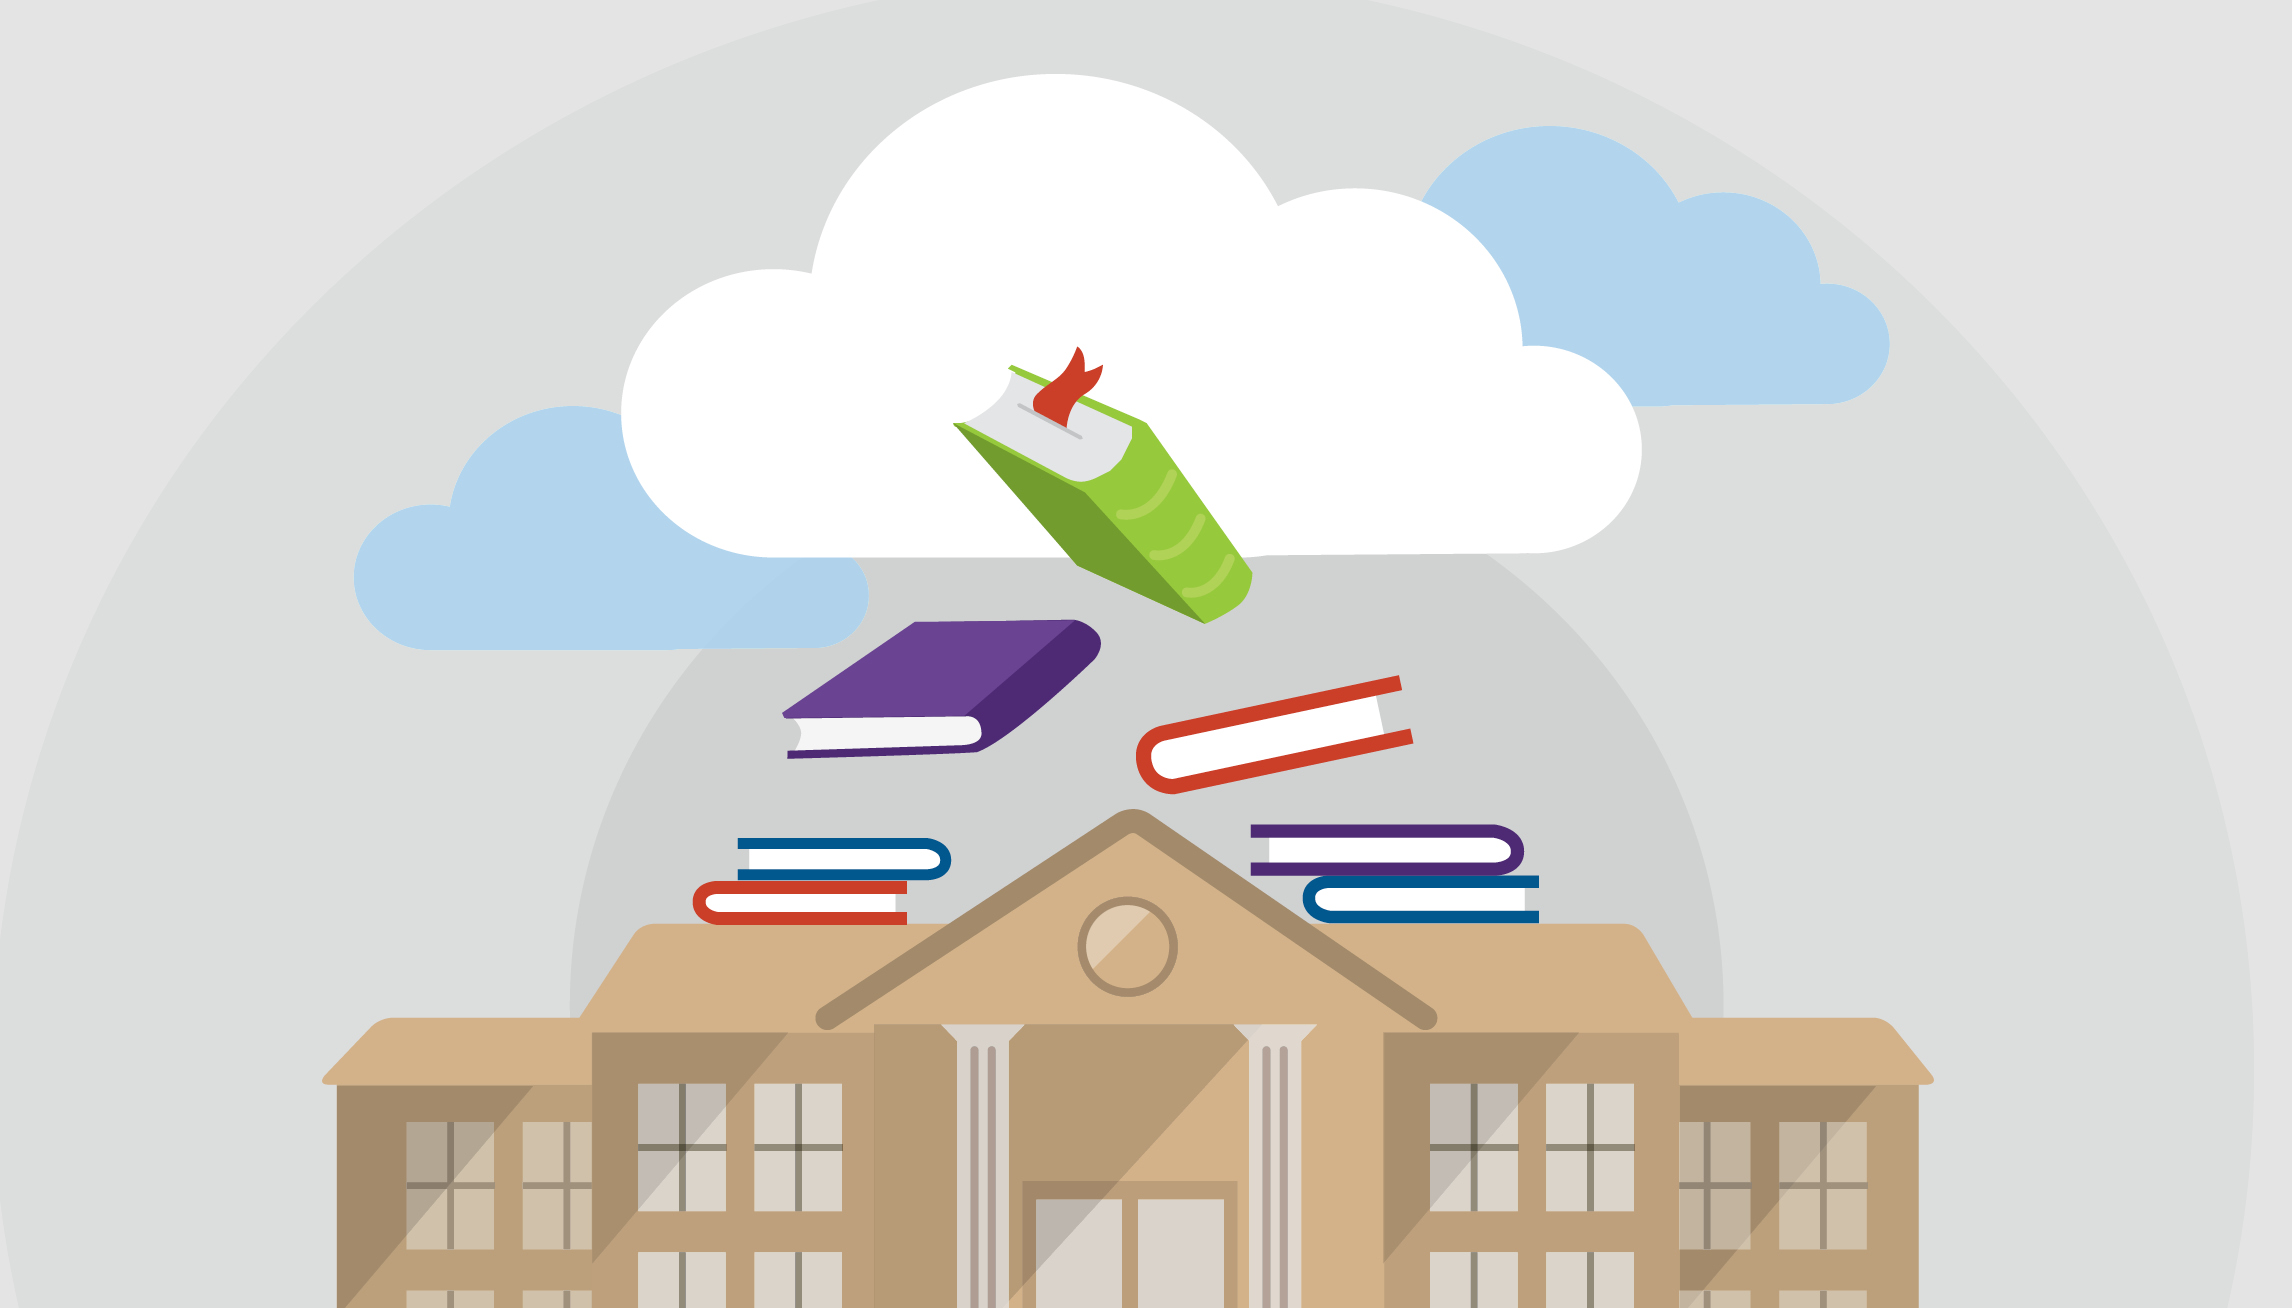 Classroom to Cloud: Migrating Your Educational Infrastructure